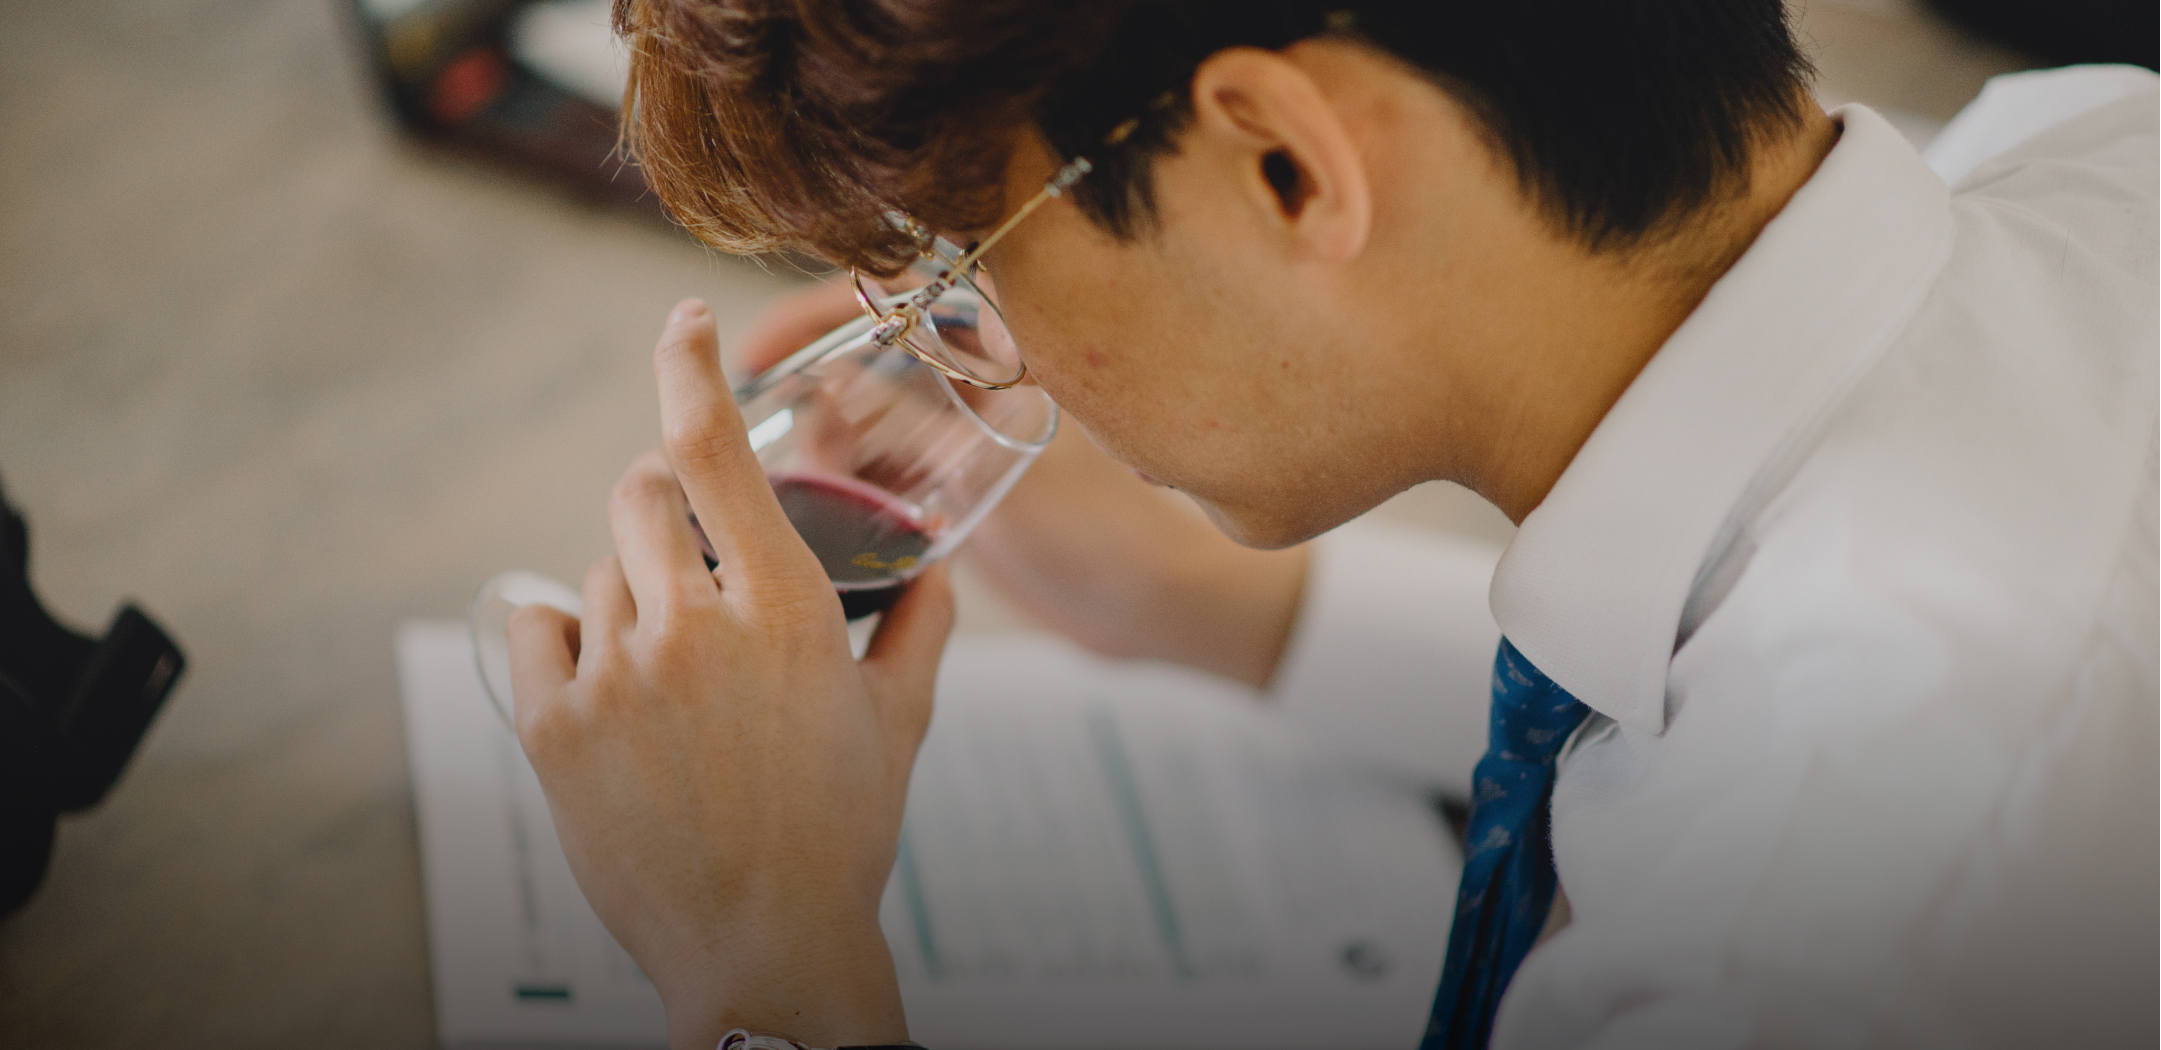 Certificate in Wine Business Management